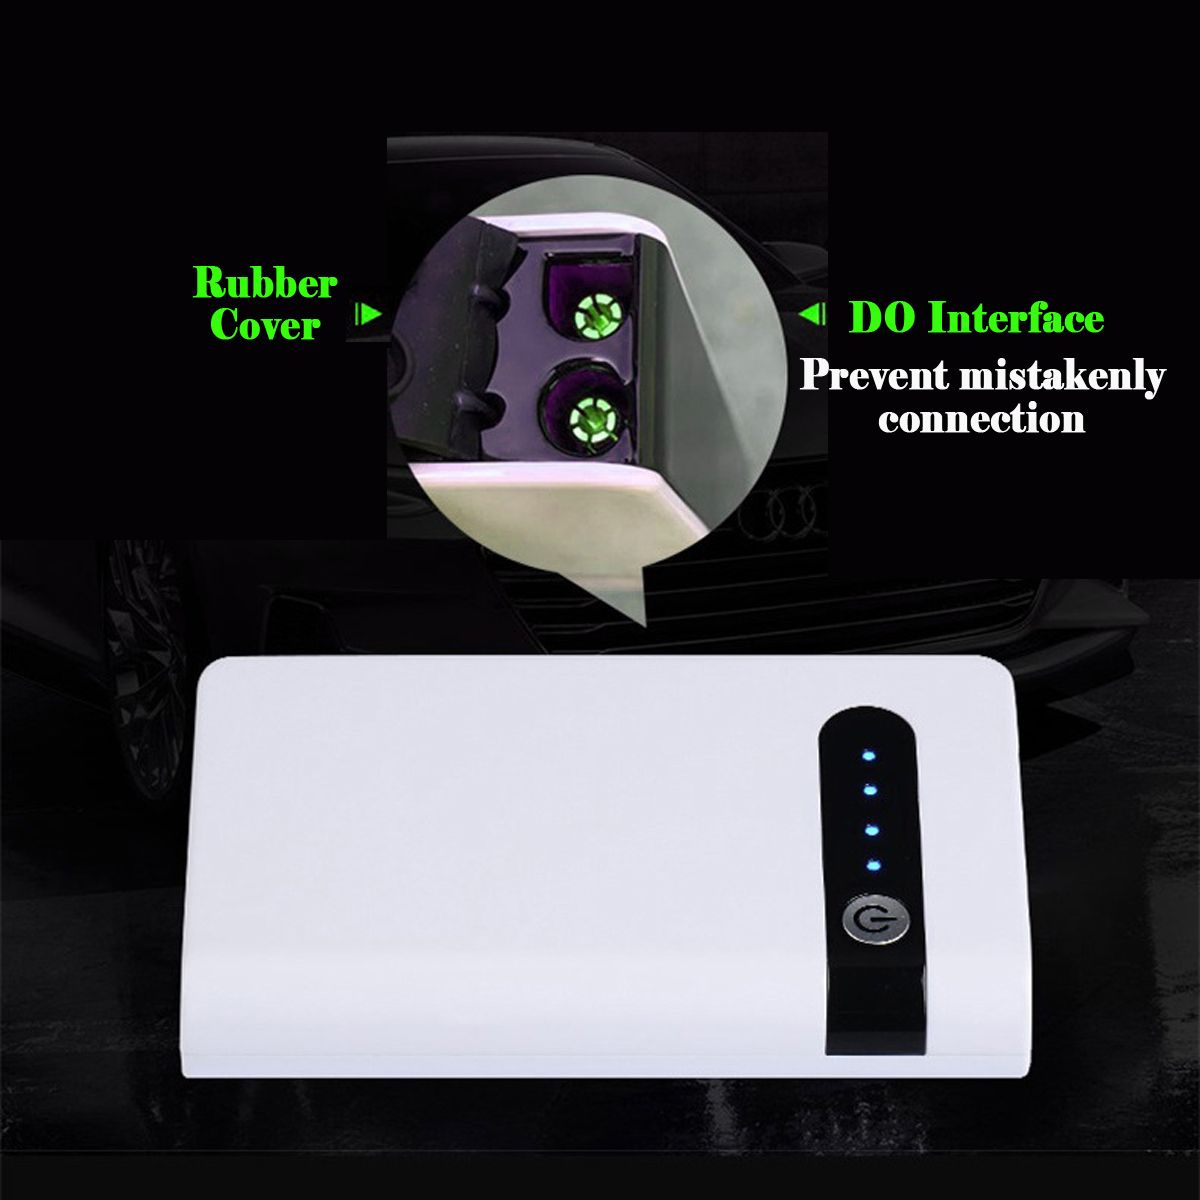 11000mAh-12V-Portable-Car-Jump-Starter-Emergency-Battery-Booster-Powerbank-Waterproof-with-LED-Flash-1611331